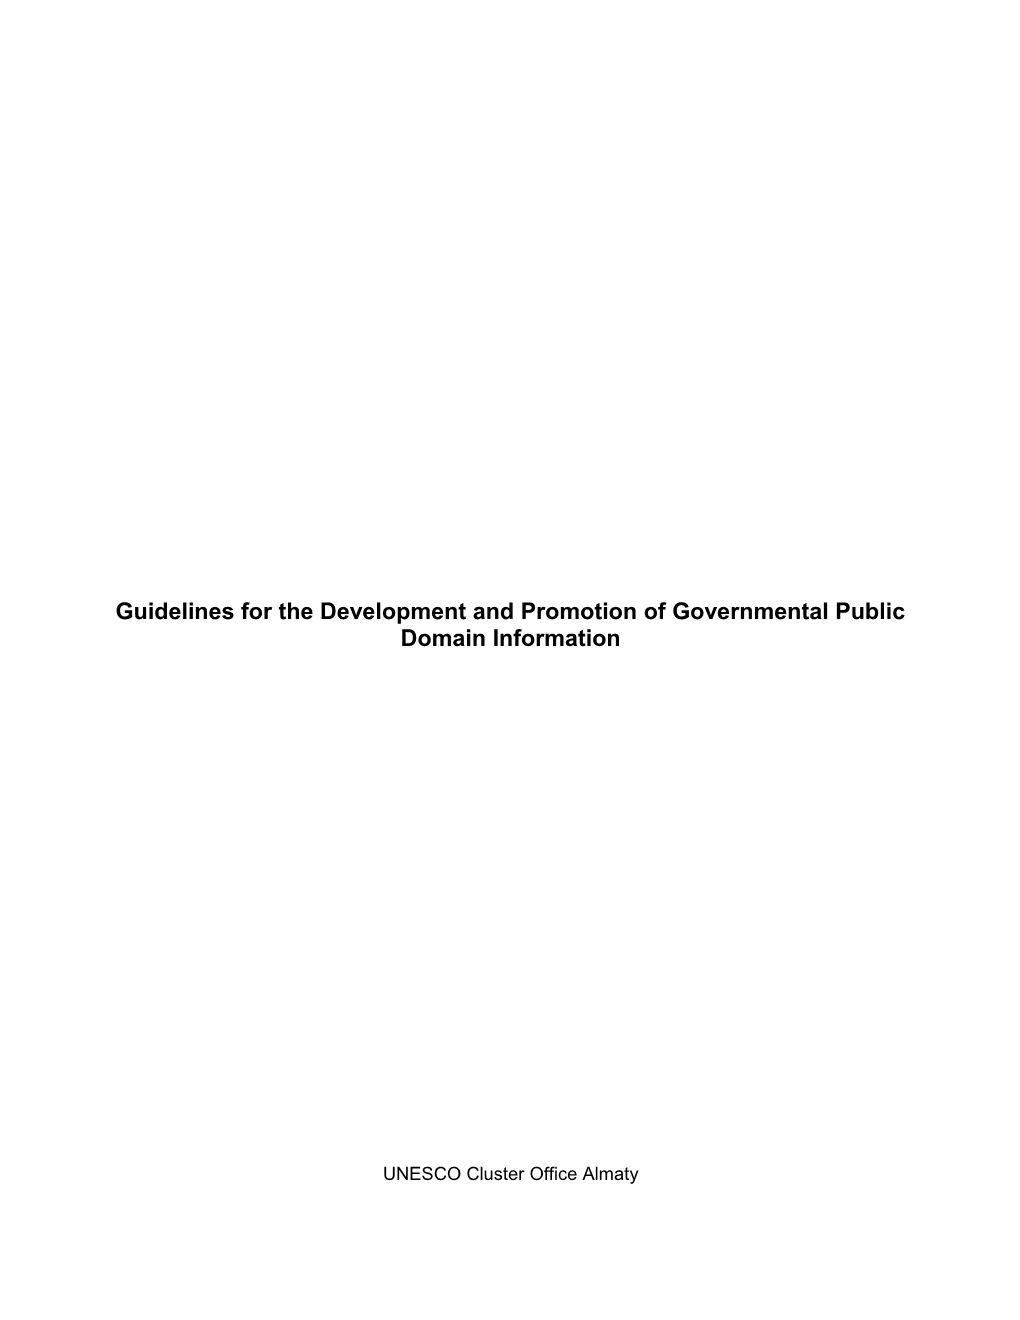 Guidelines for the Development and Promotion of Governmental Public Domain Information